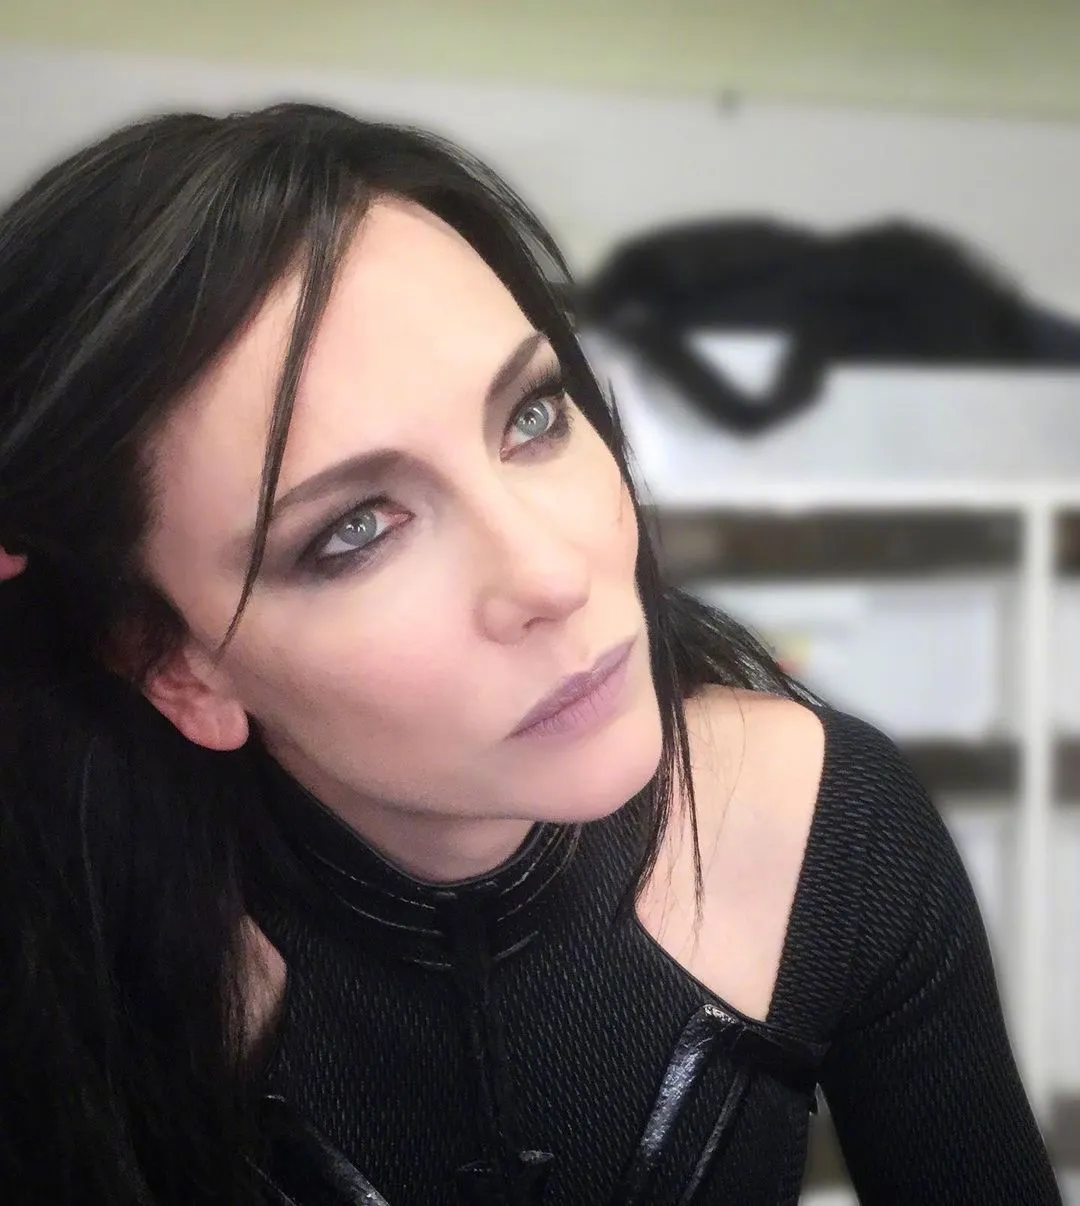 Cate Blanchett in 'Thor: Ragnarok' Hela's early makeup trial look revealed | FMV6